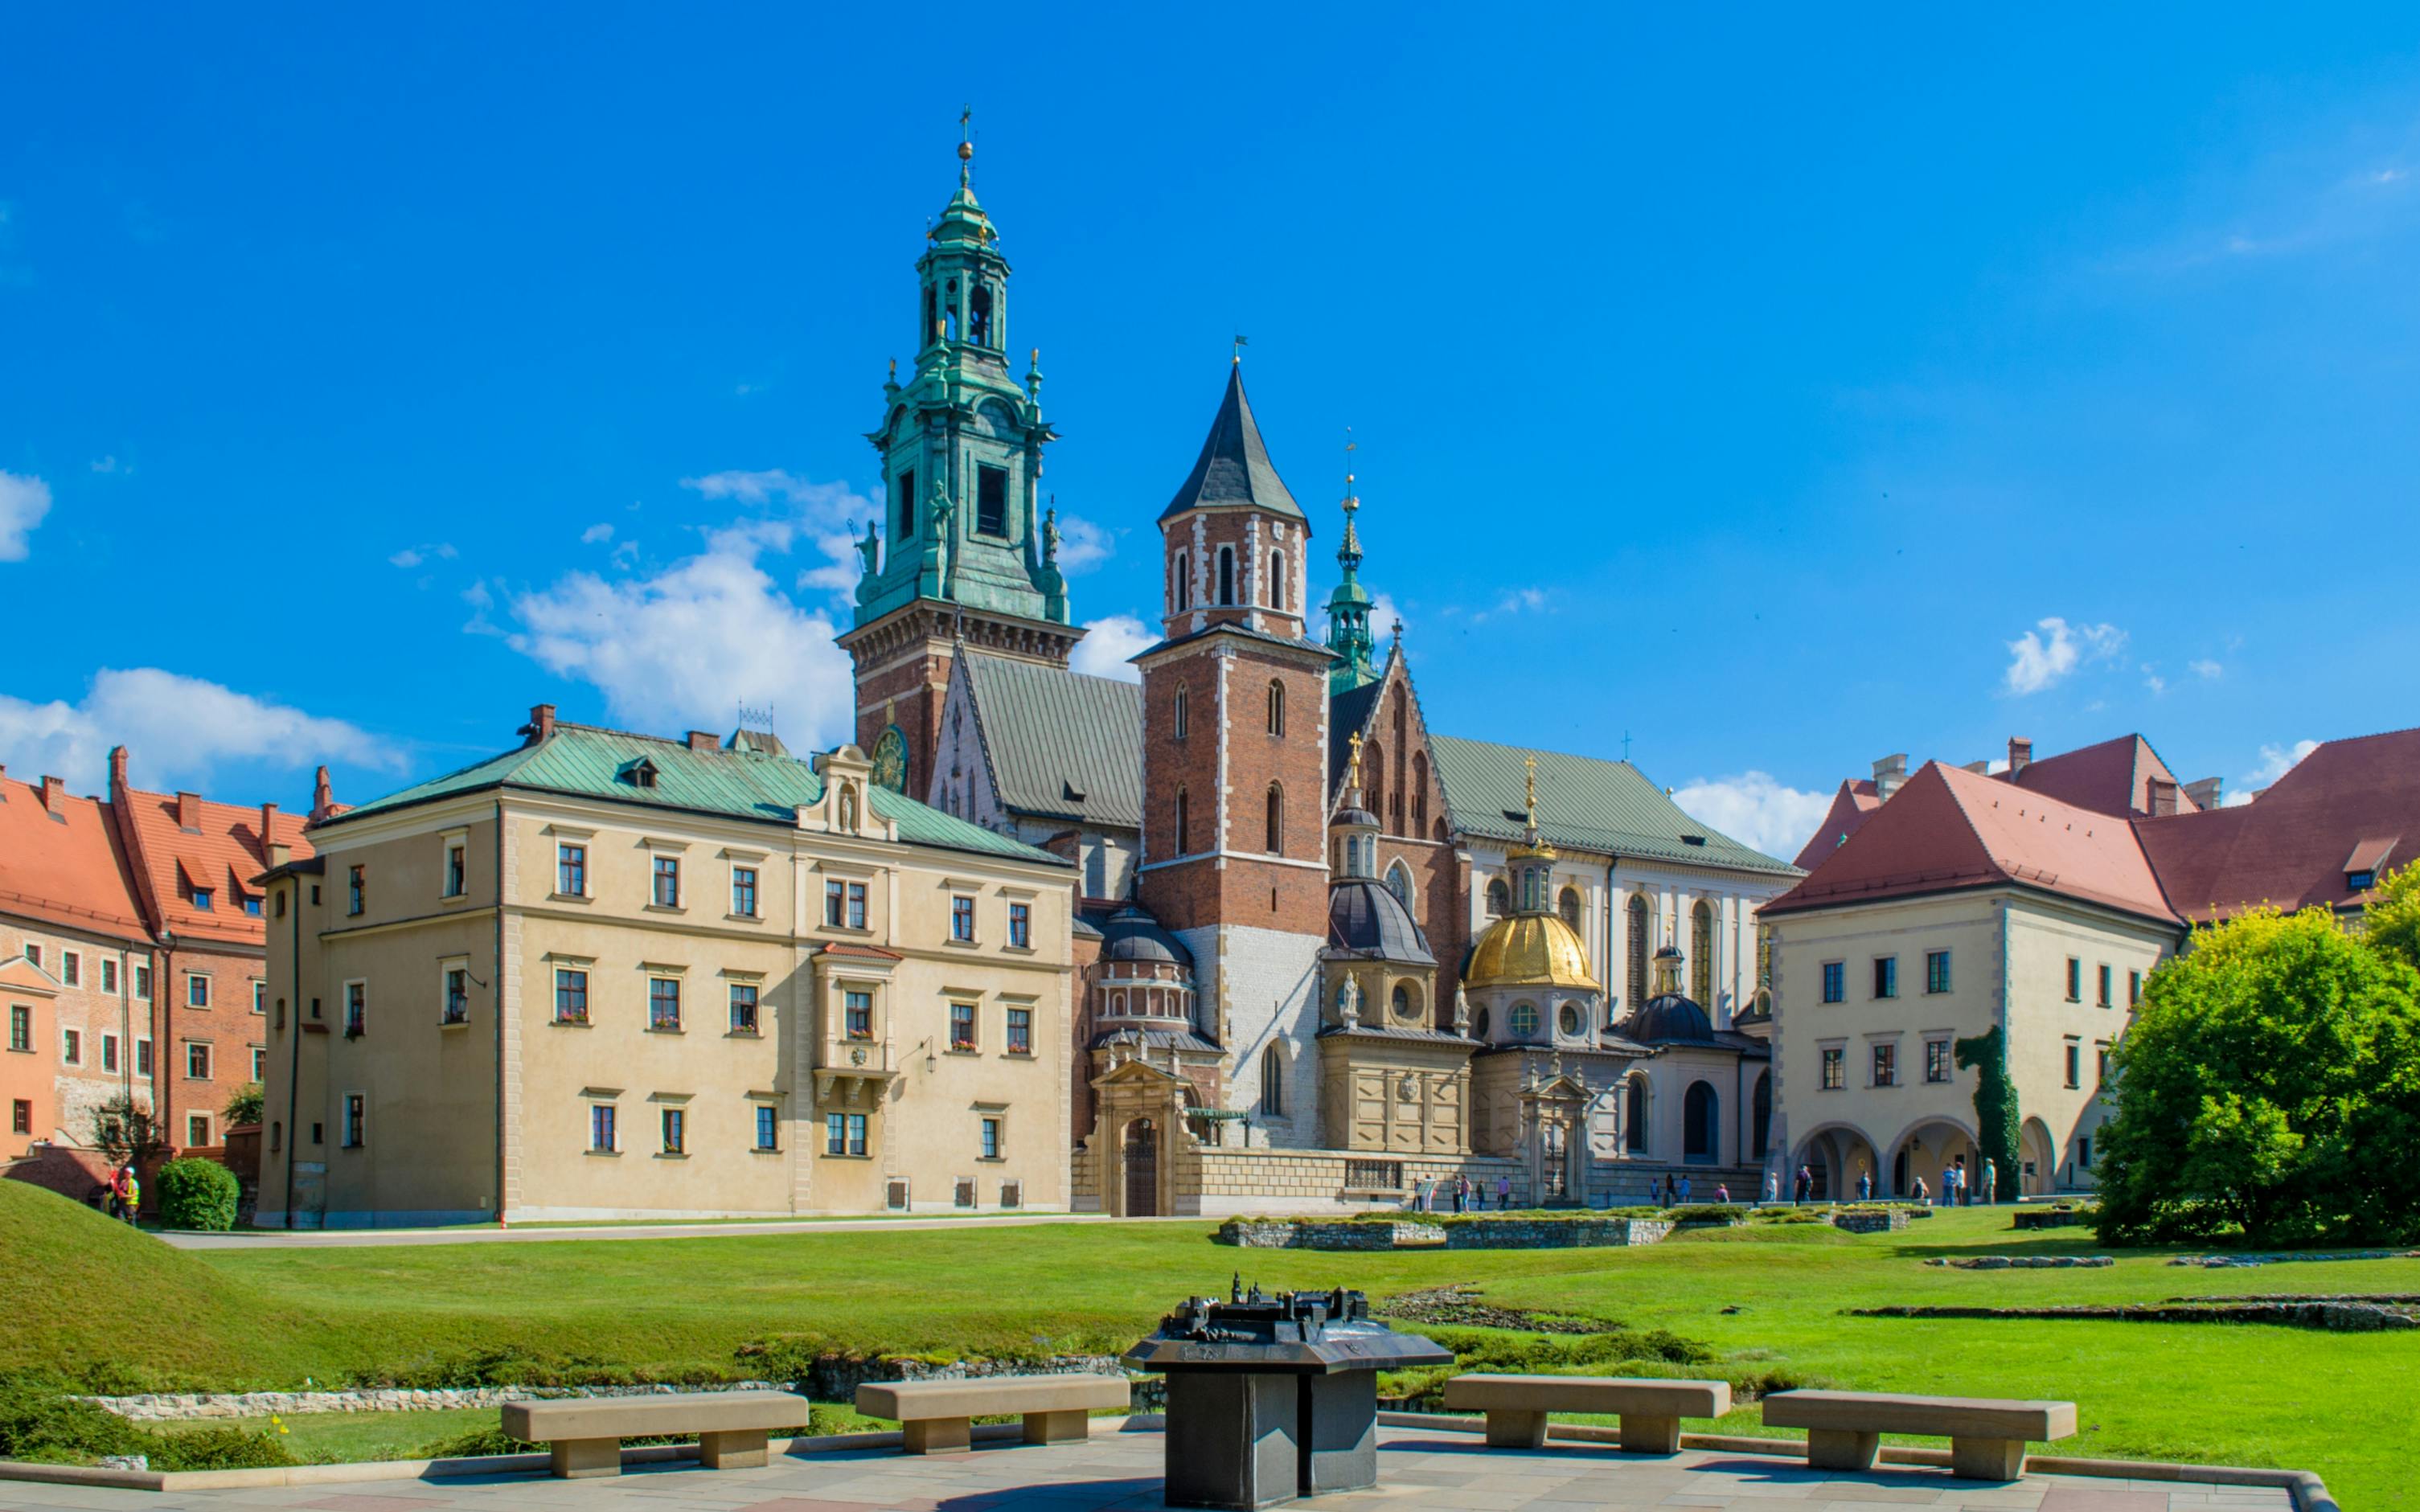 Wawel Castle guided tour discover the history and secrets of Polish monarchy